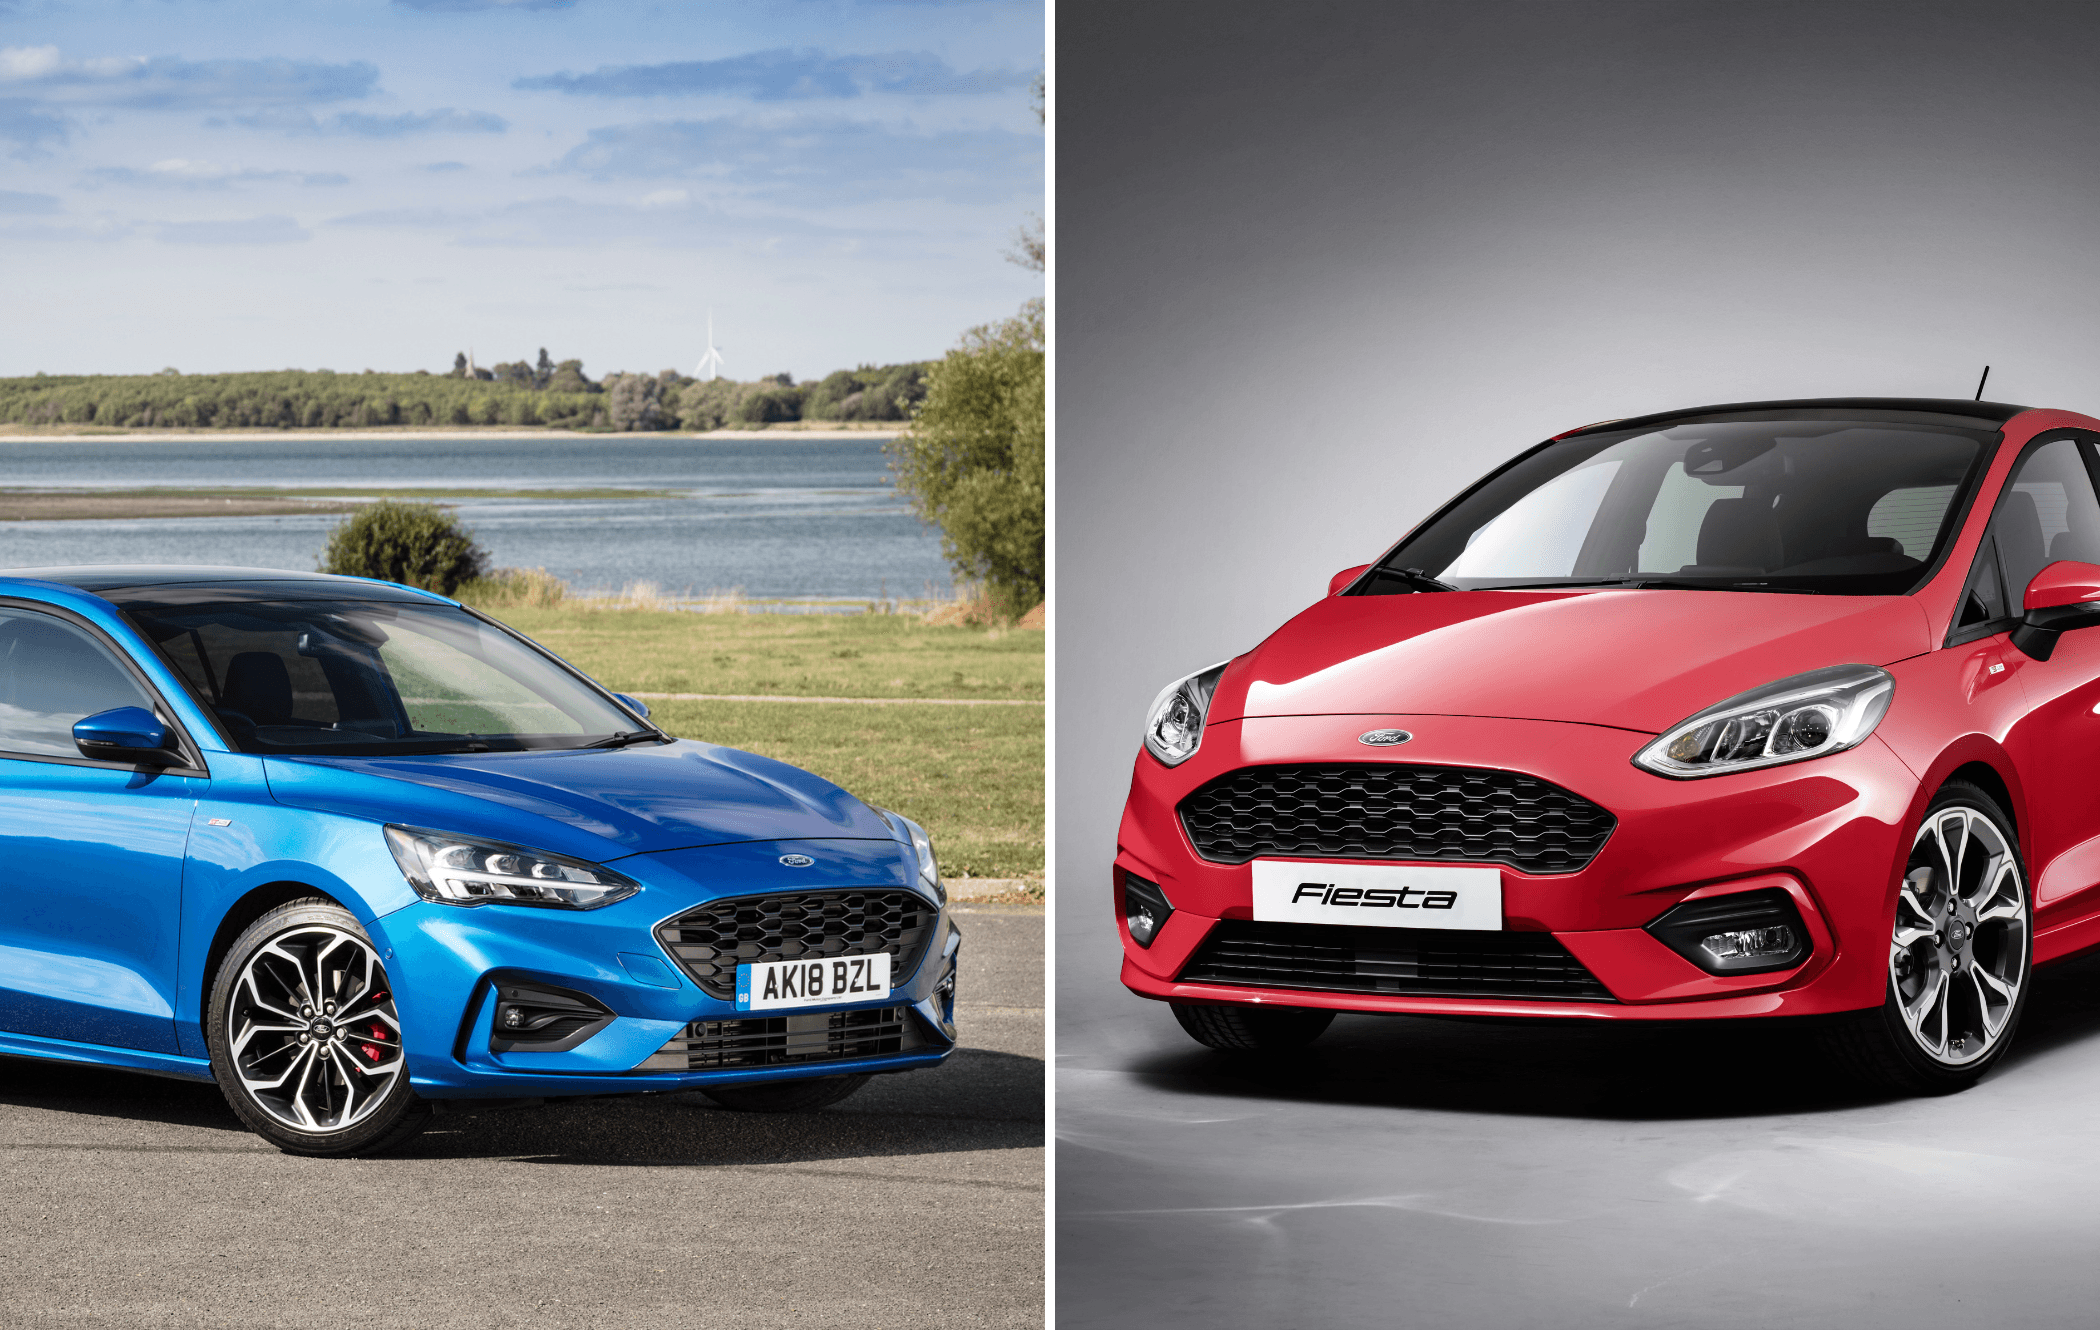 left is blue focus and right is red fiesta